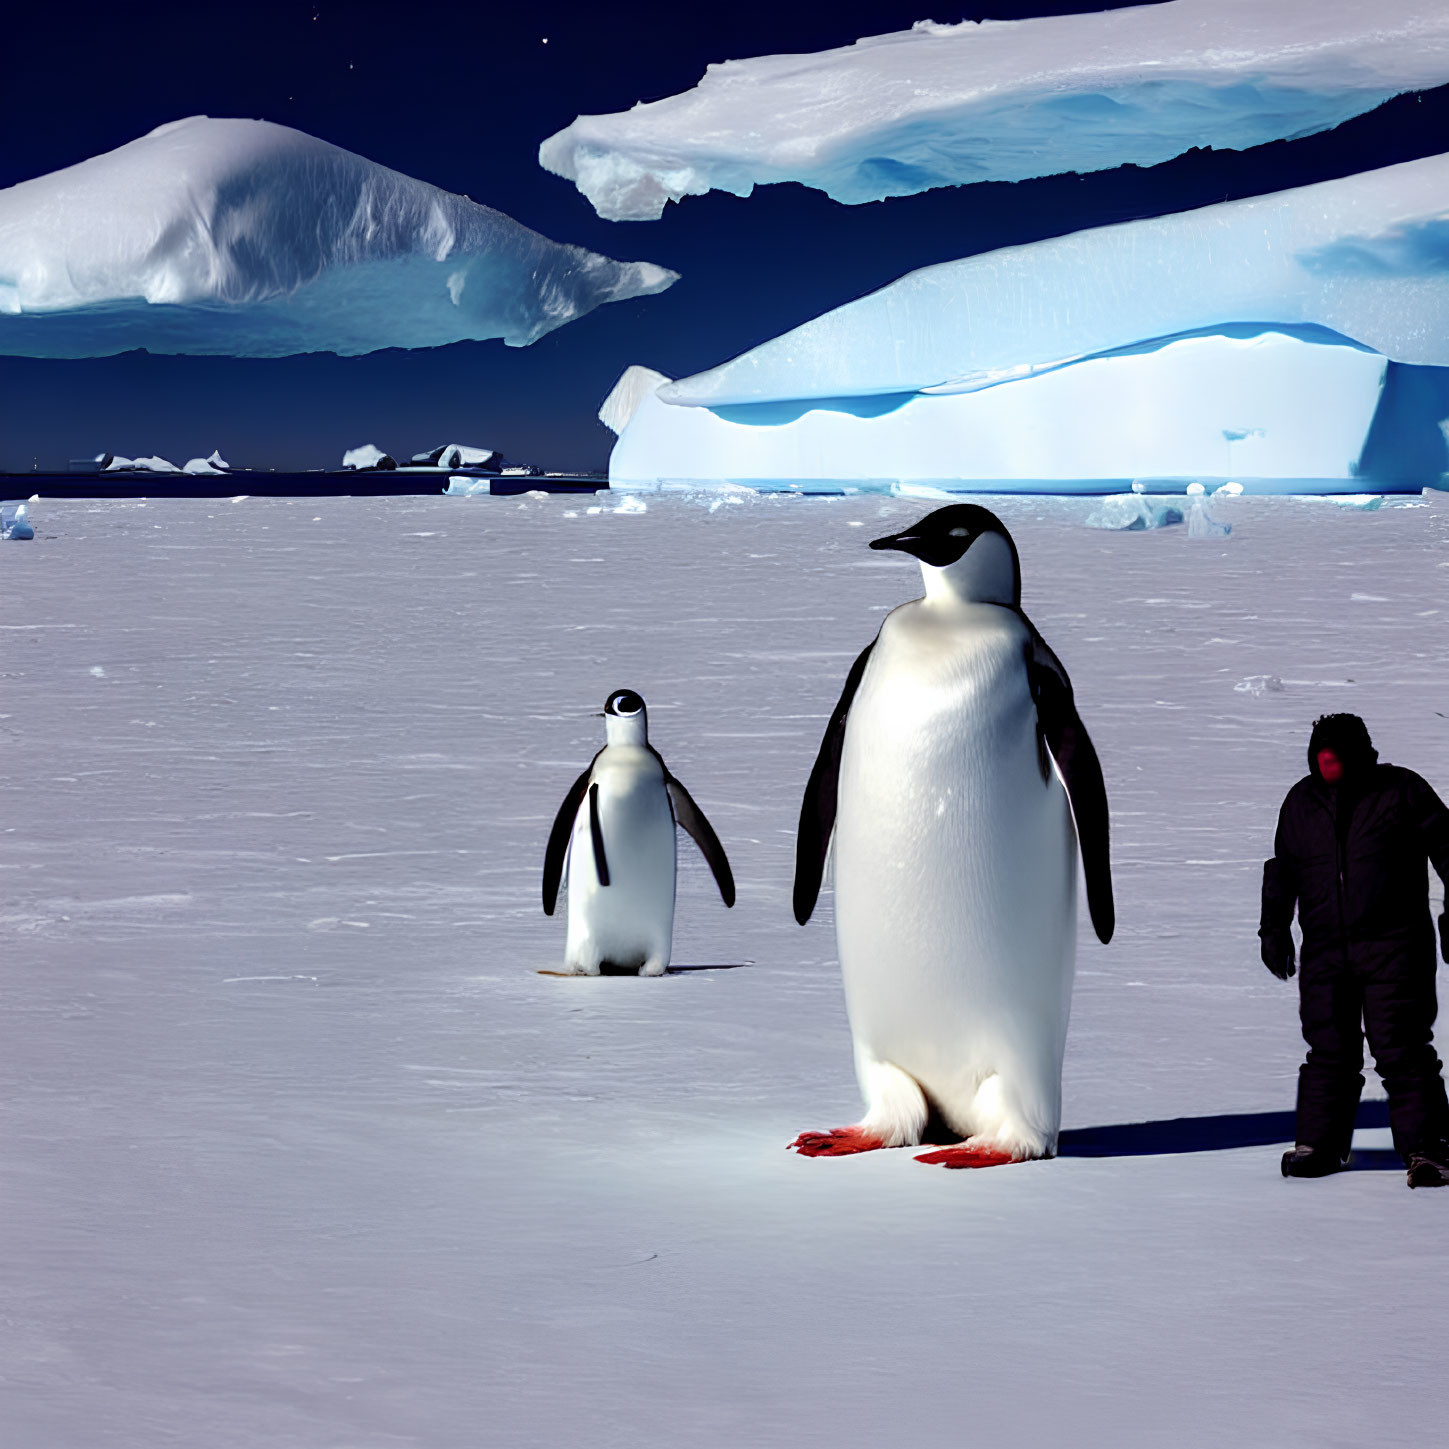 Two Penguins and Person on Snowy Landscape with Icebergs